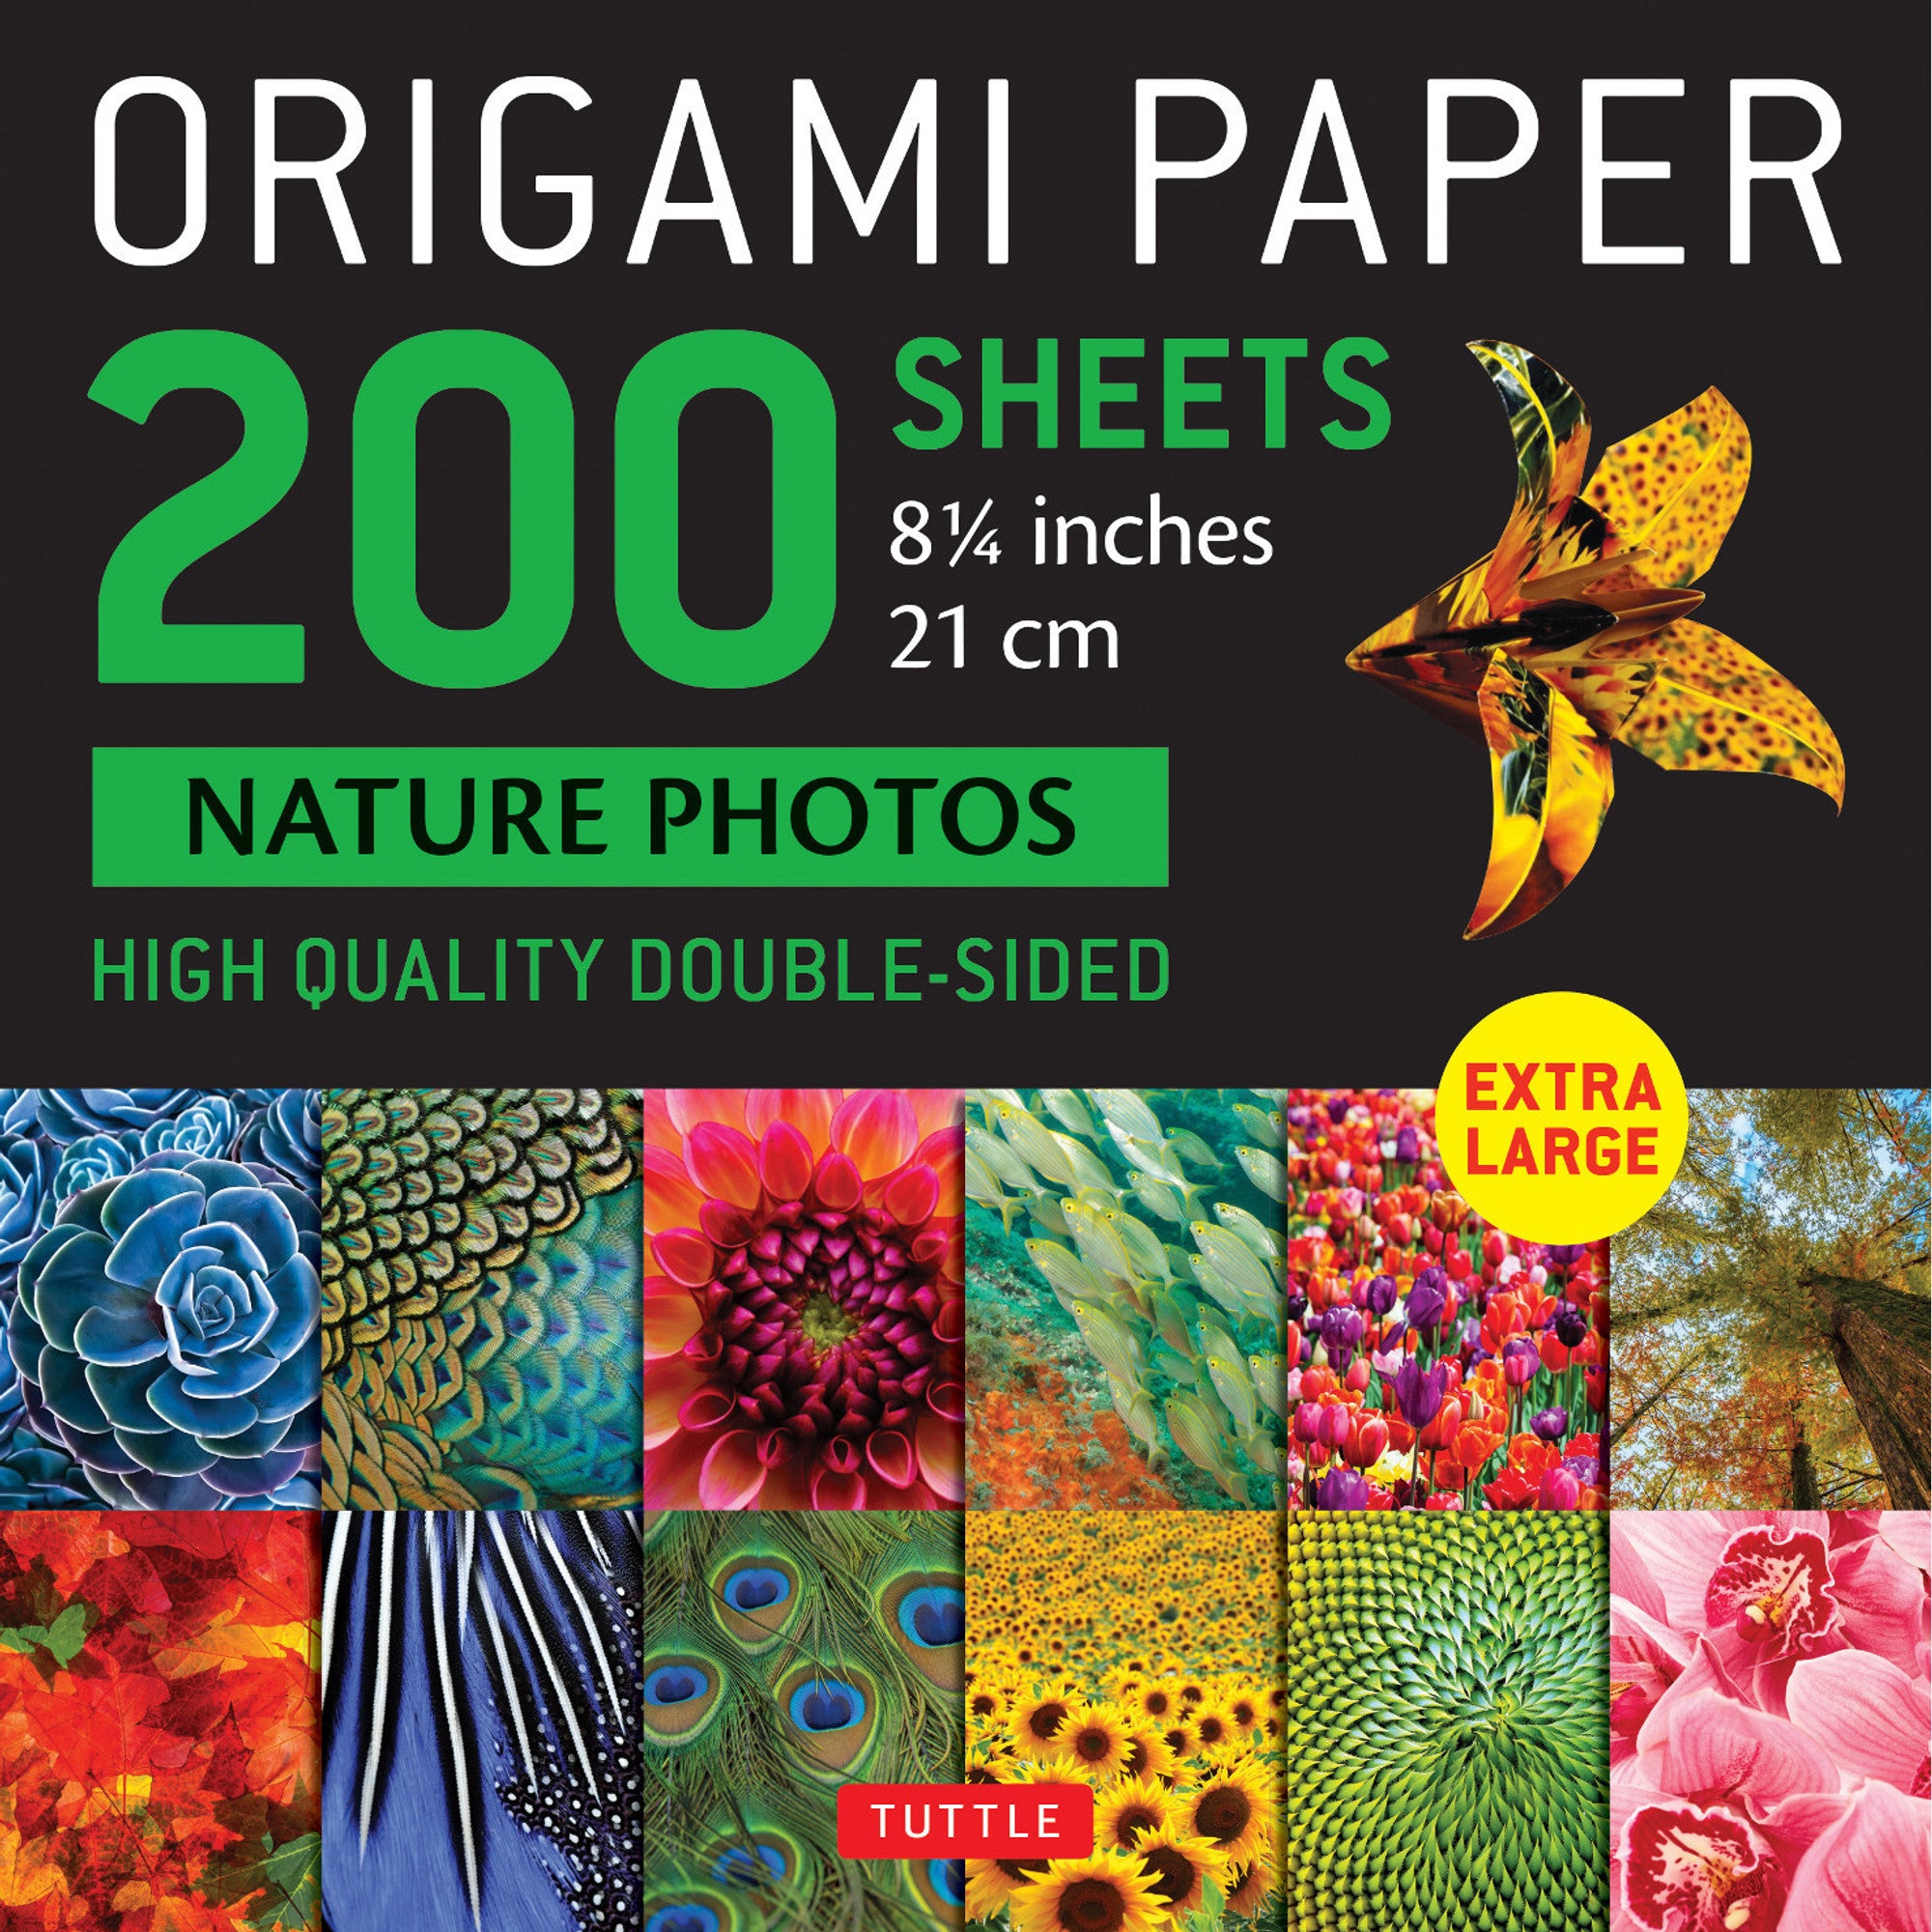 Large 200 Sheets Nature Photos Origami Paper